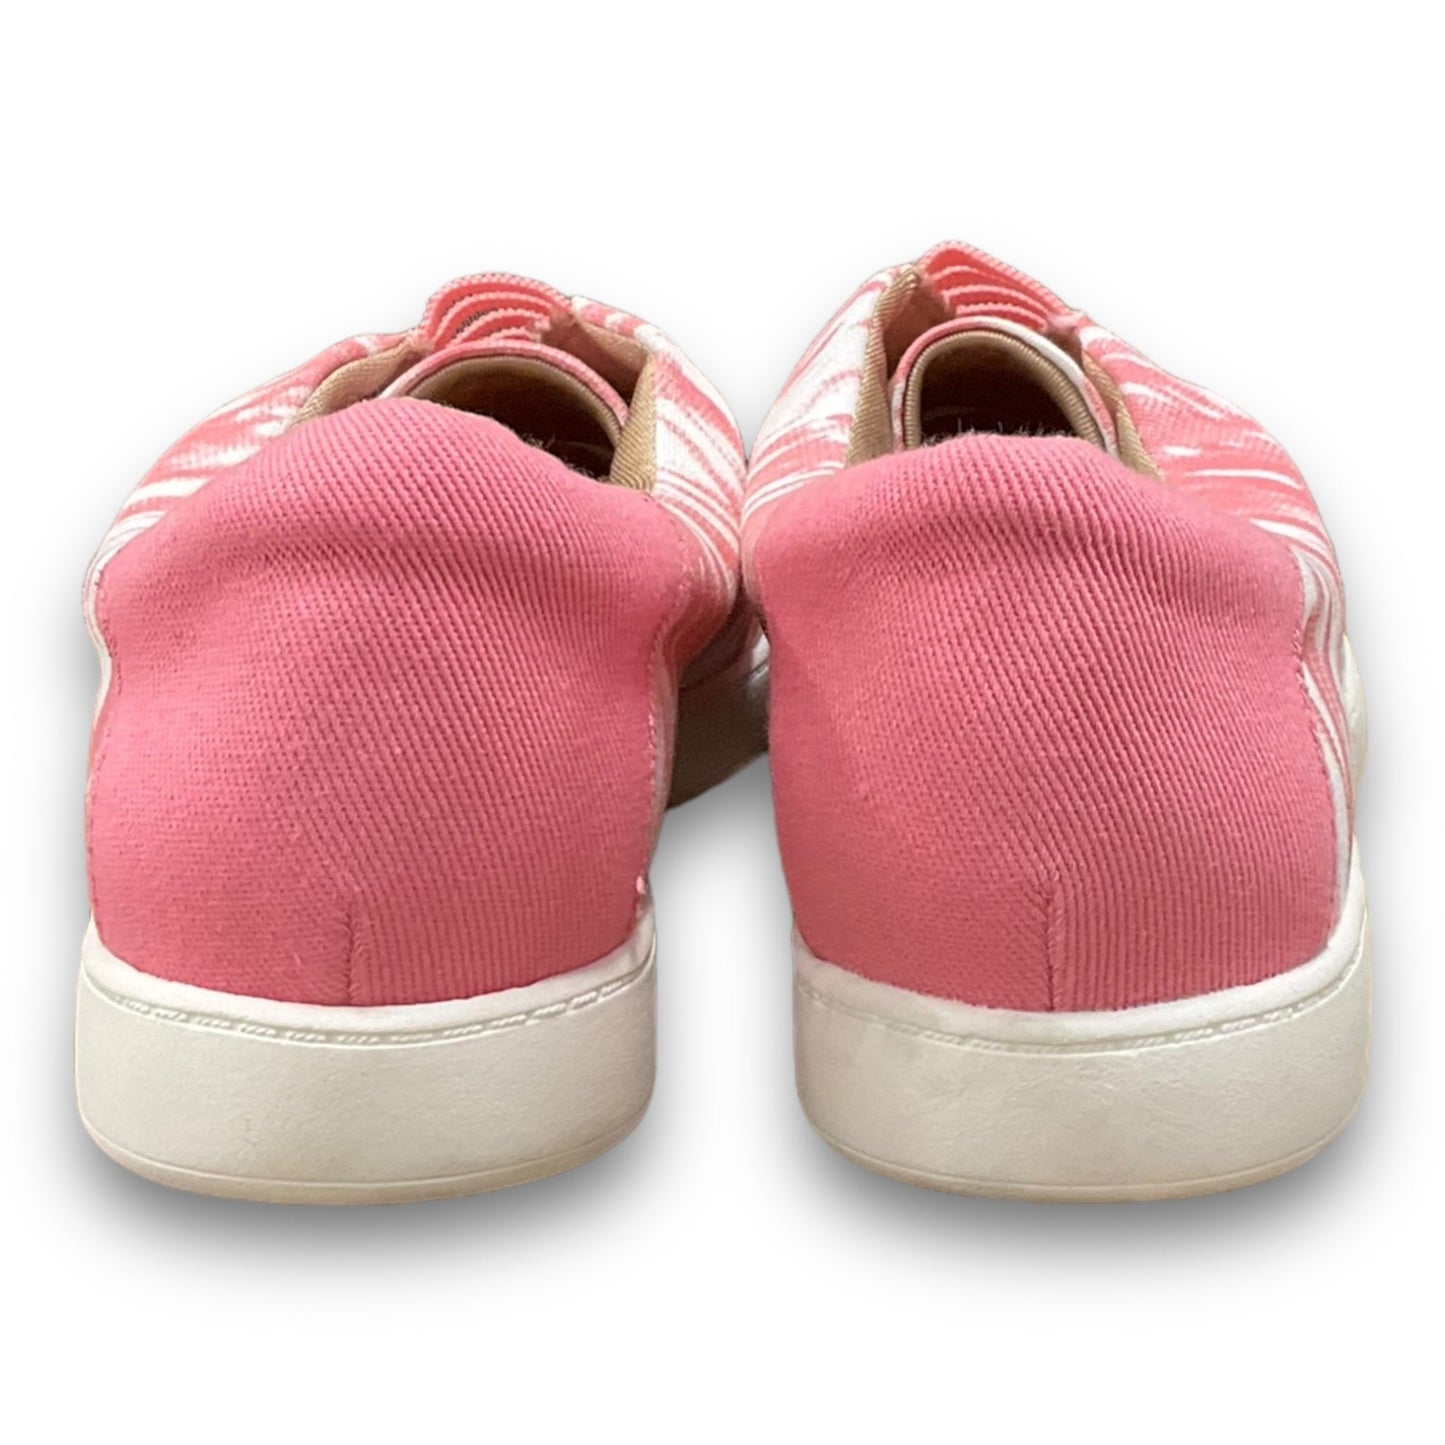 Shoes Sneakers By Life Stride  Size: 7.5